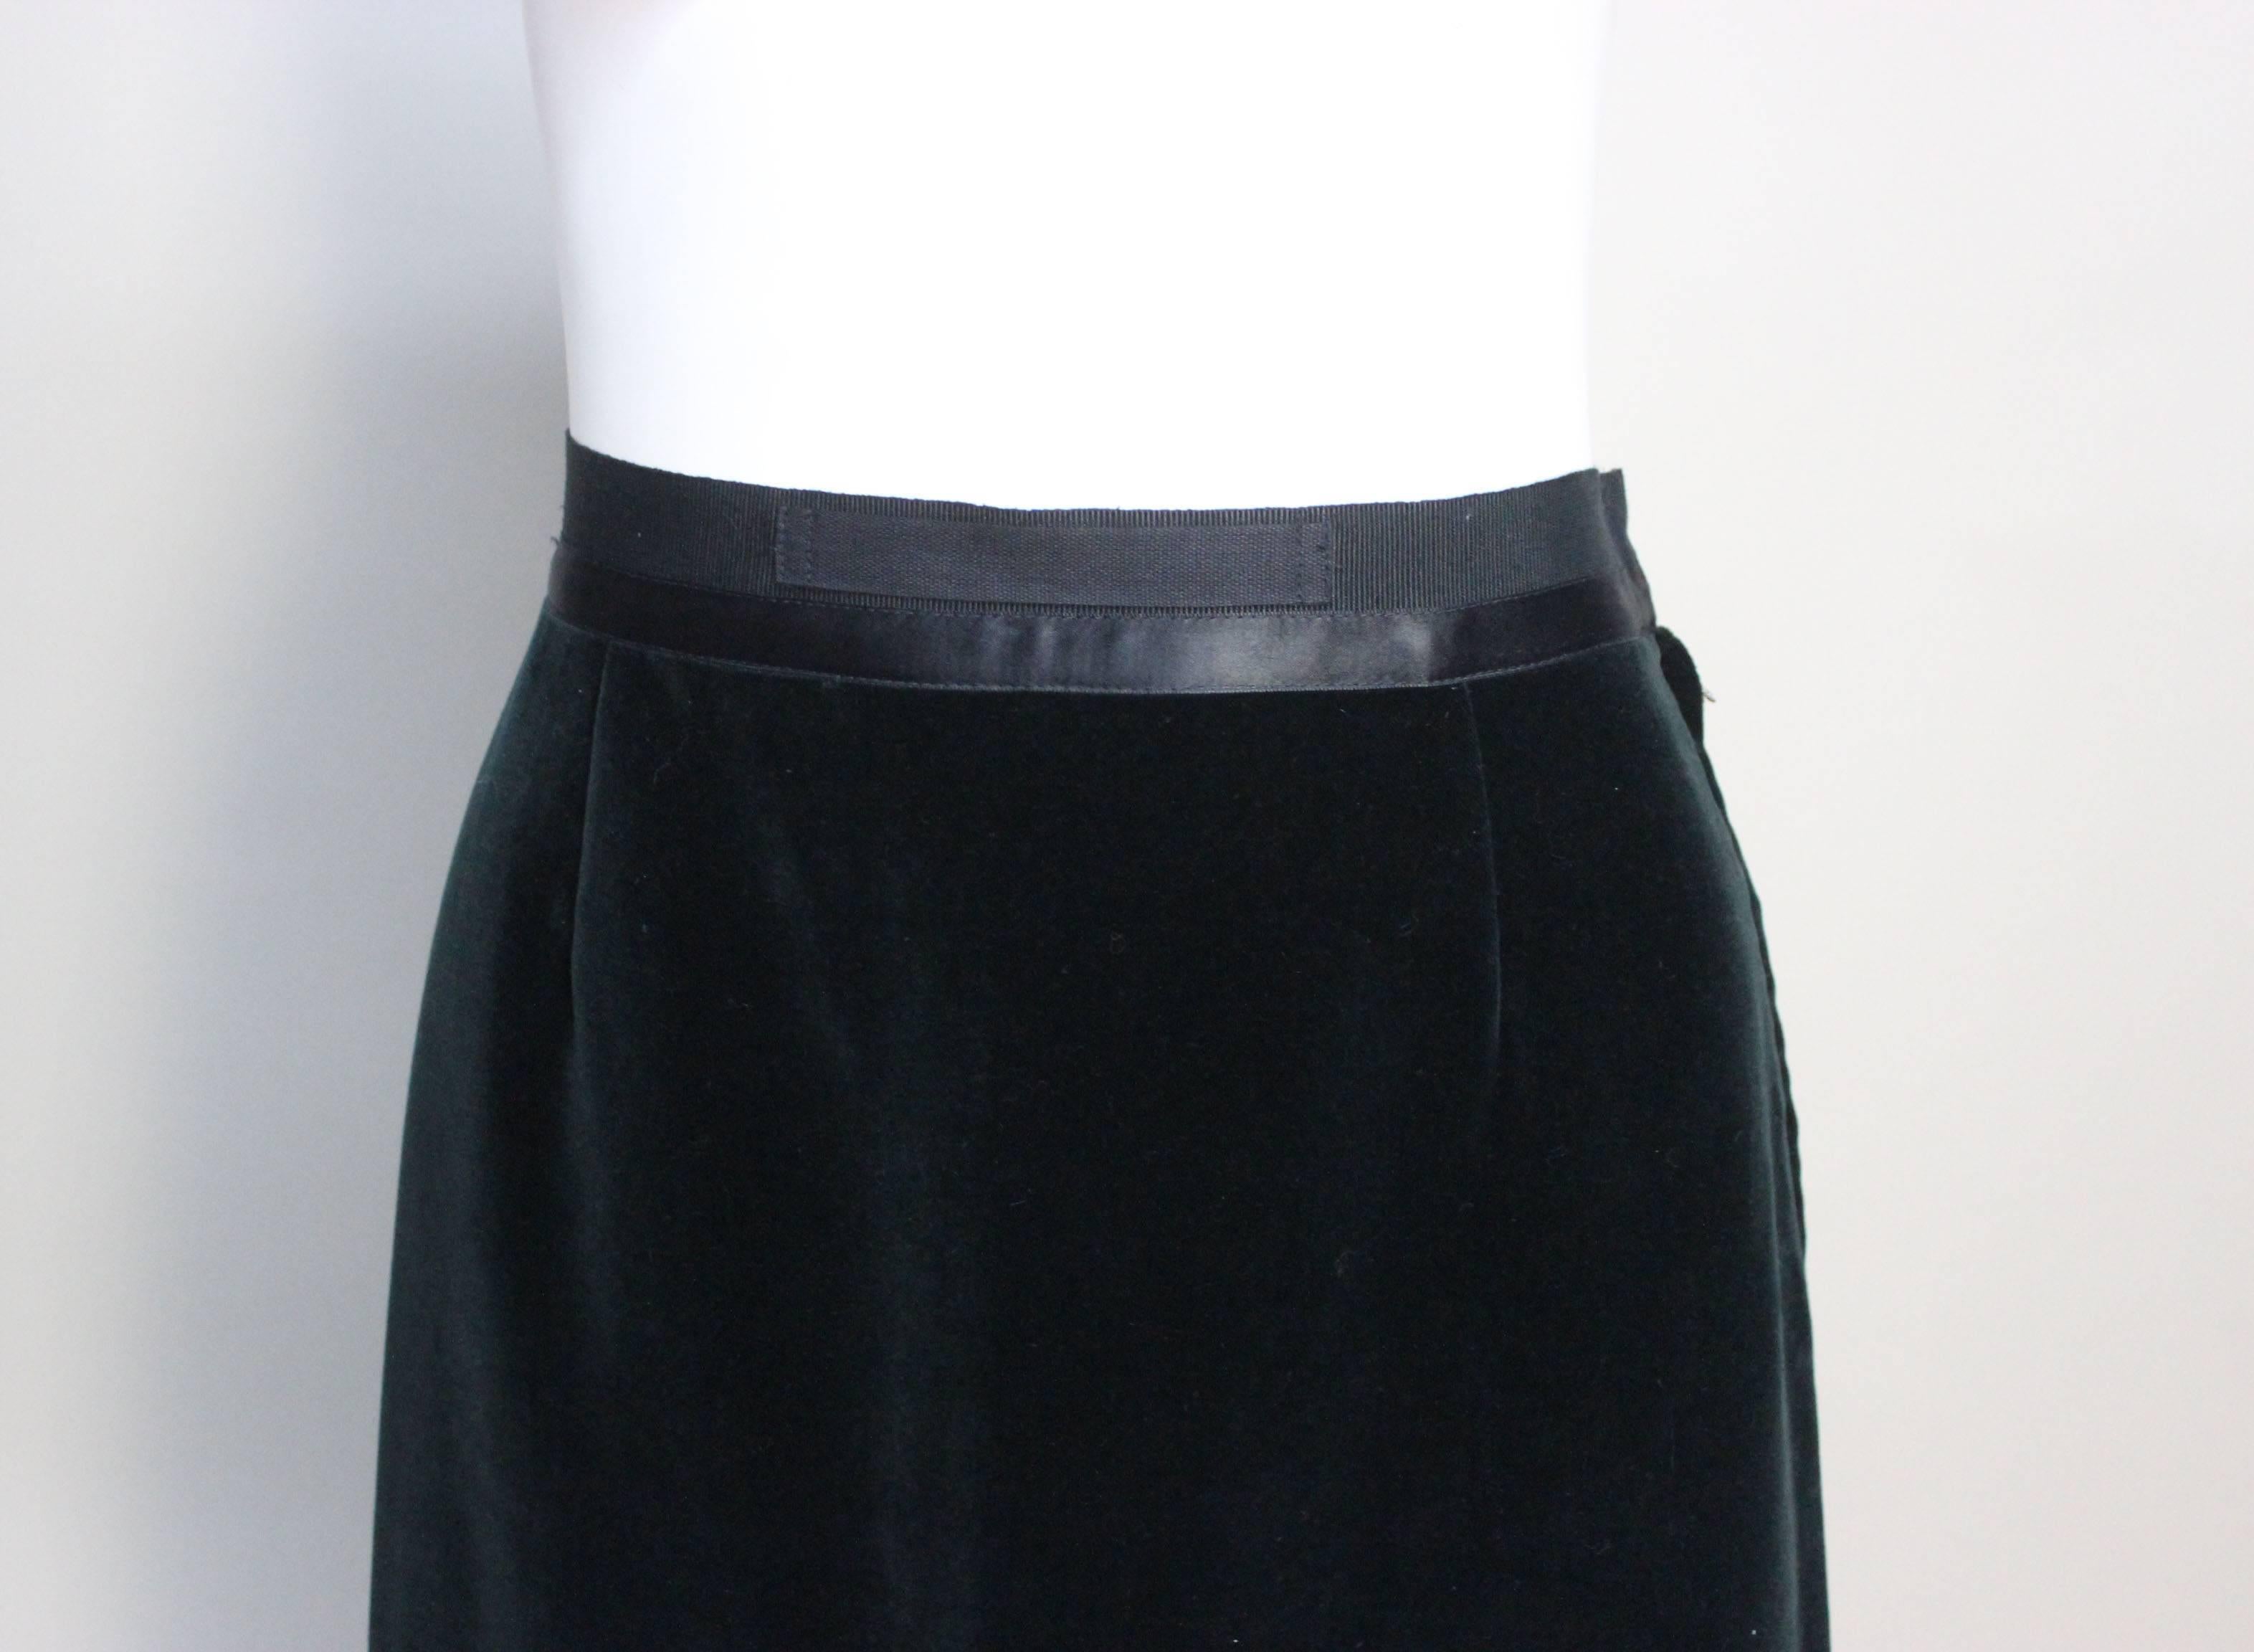 Martin Margiela Early 90s Forest Green Velvet White Label Skirt In Excellent Condition For Sale In New York, NY